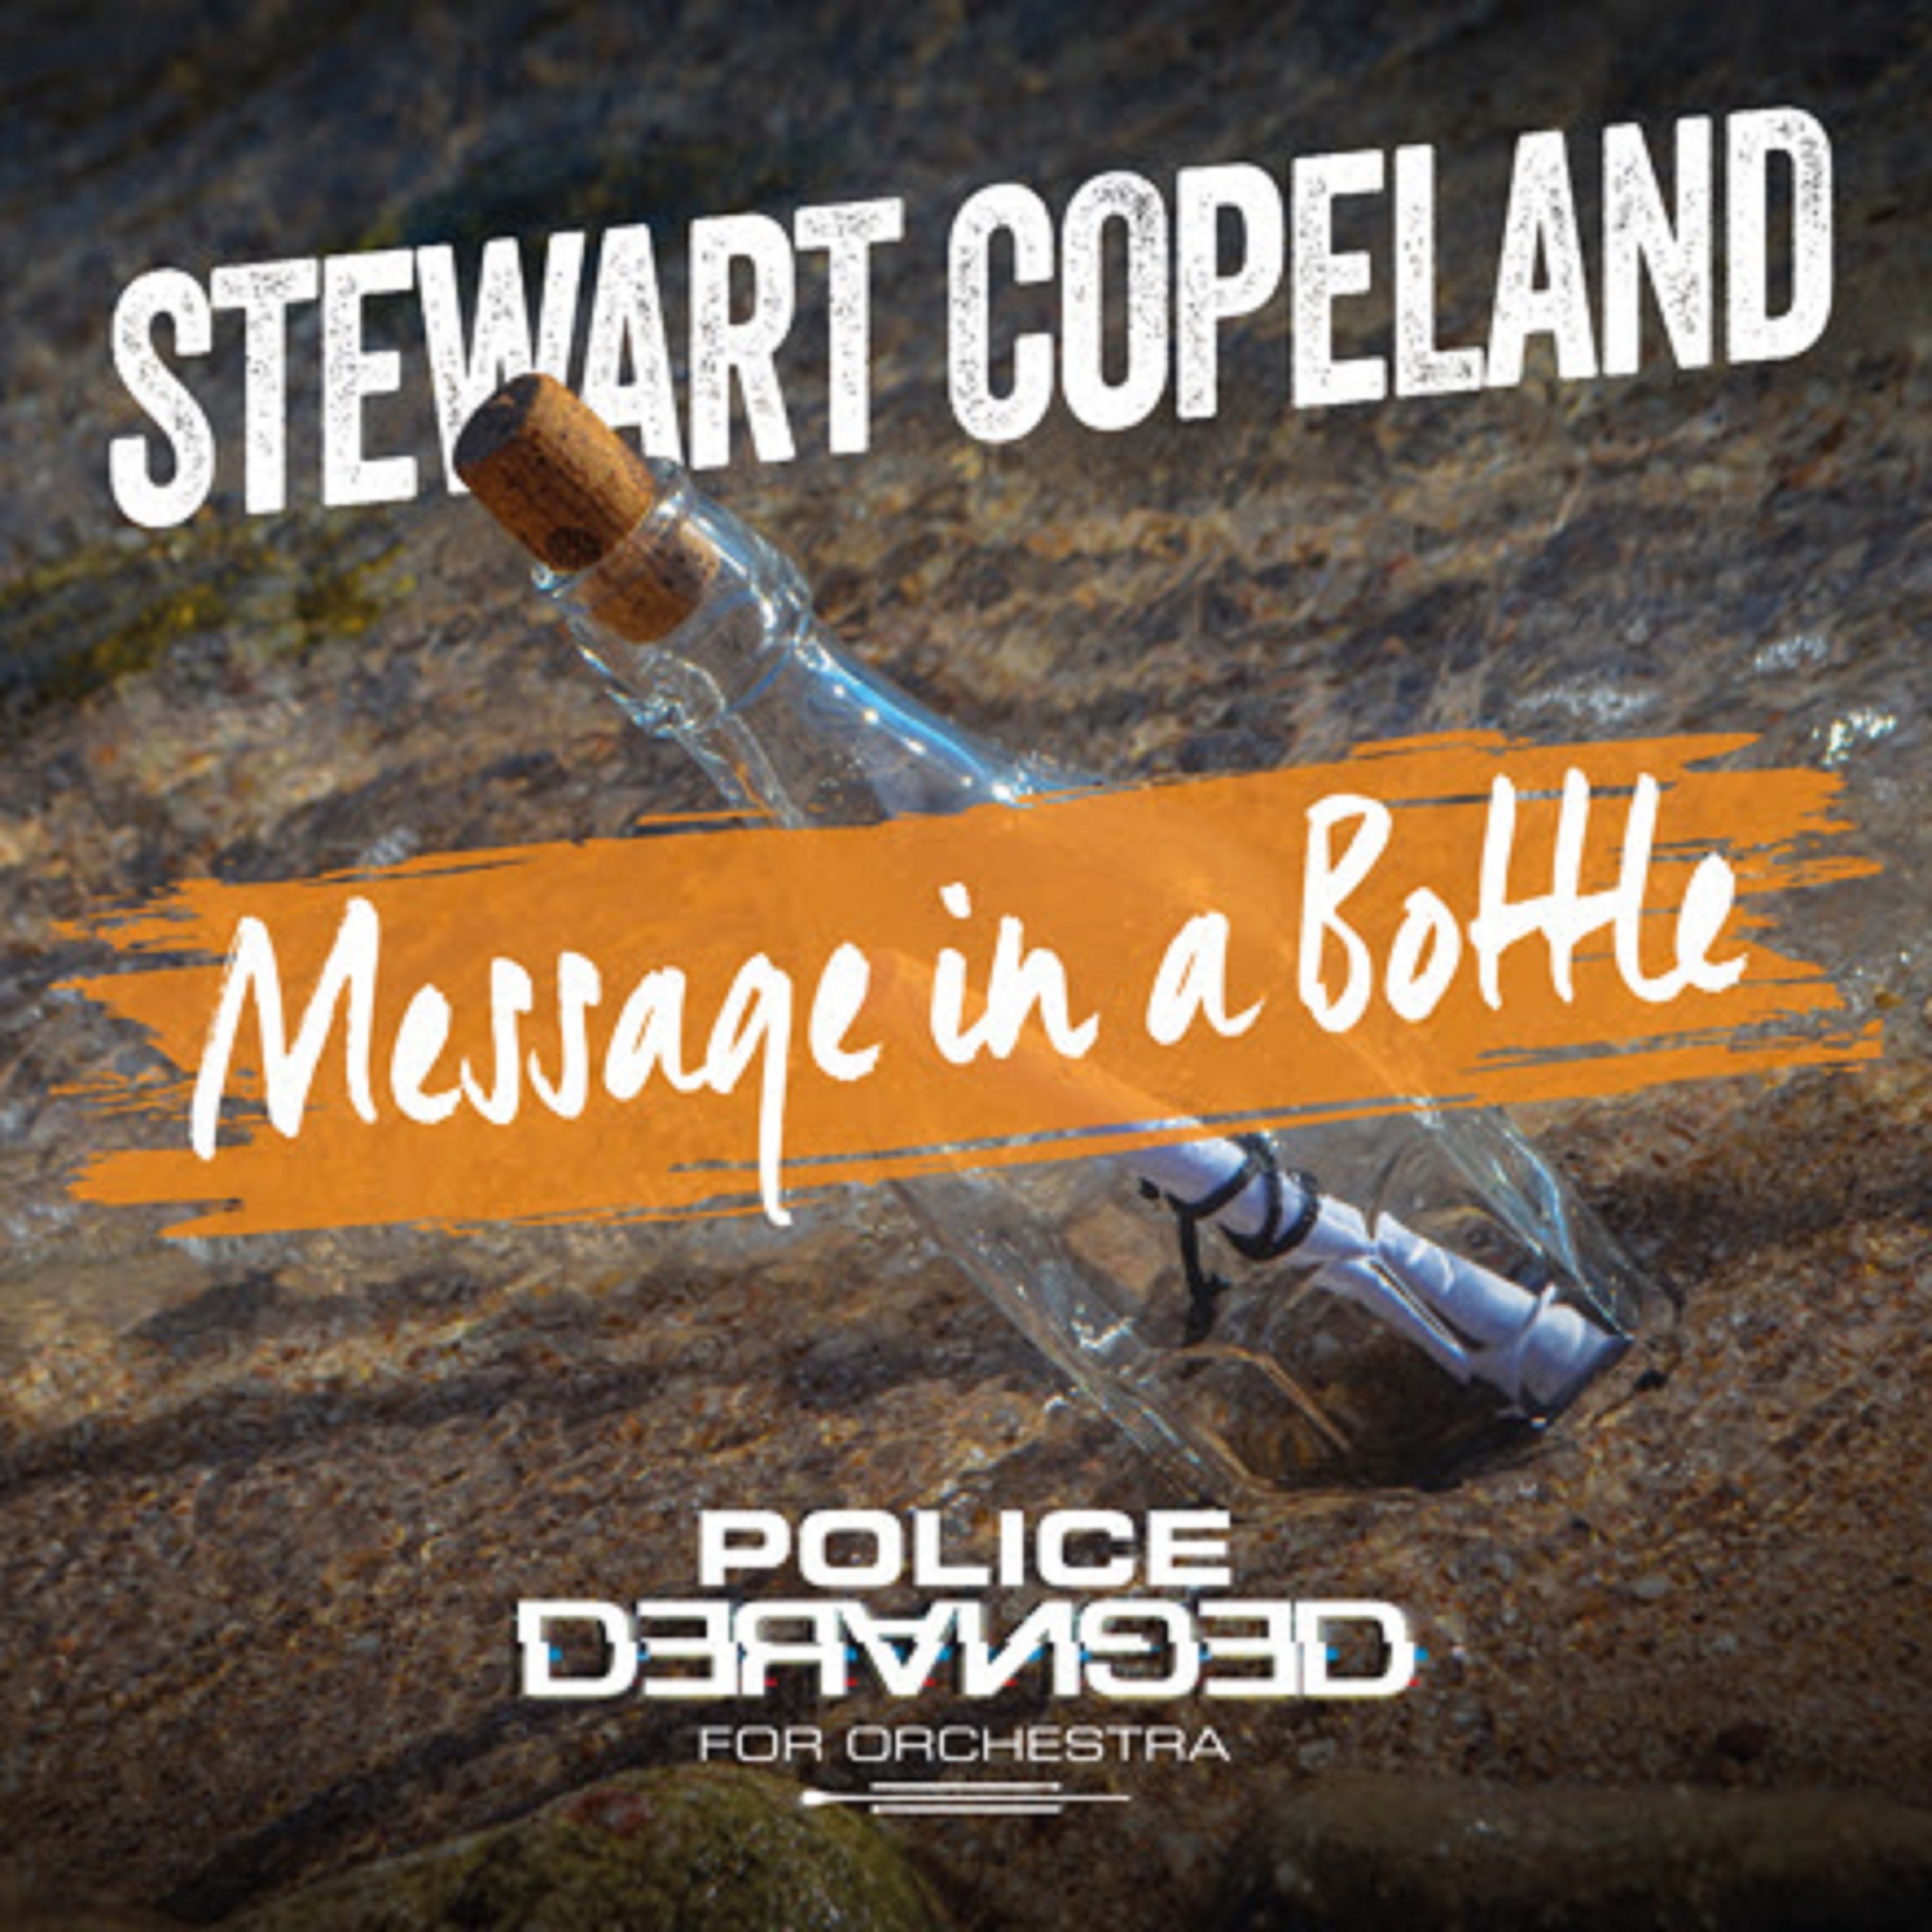 Stewart Copeland, Seven-time Grammy-Winning Composer and Police Drummer, Delivers New Orchestral Rendition of Classic “Message In A Bottle”